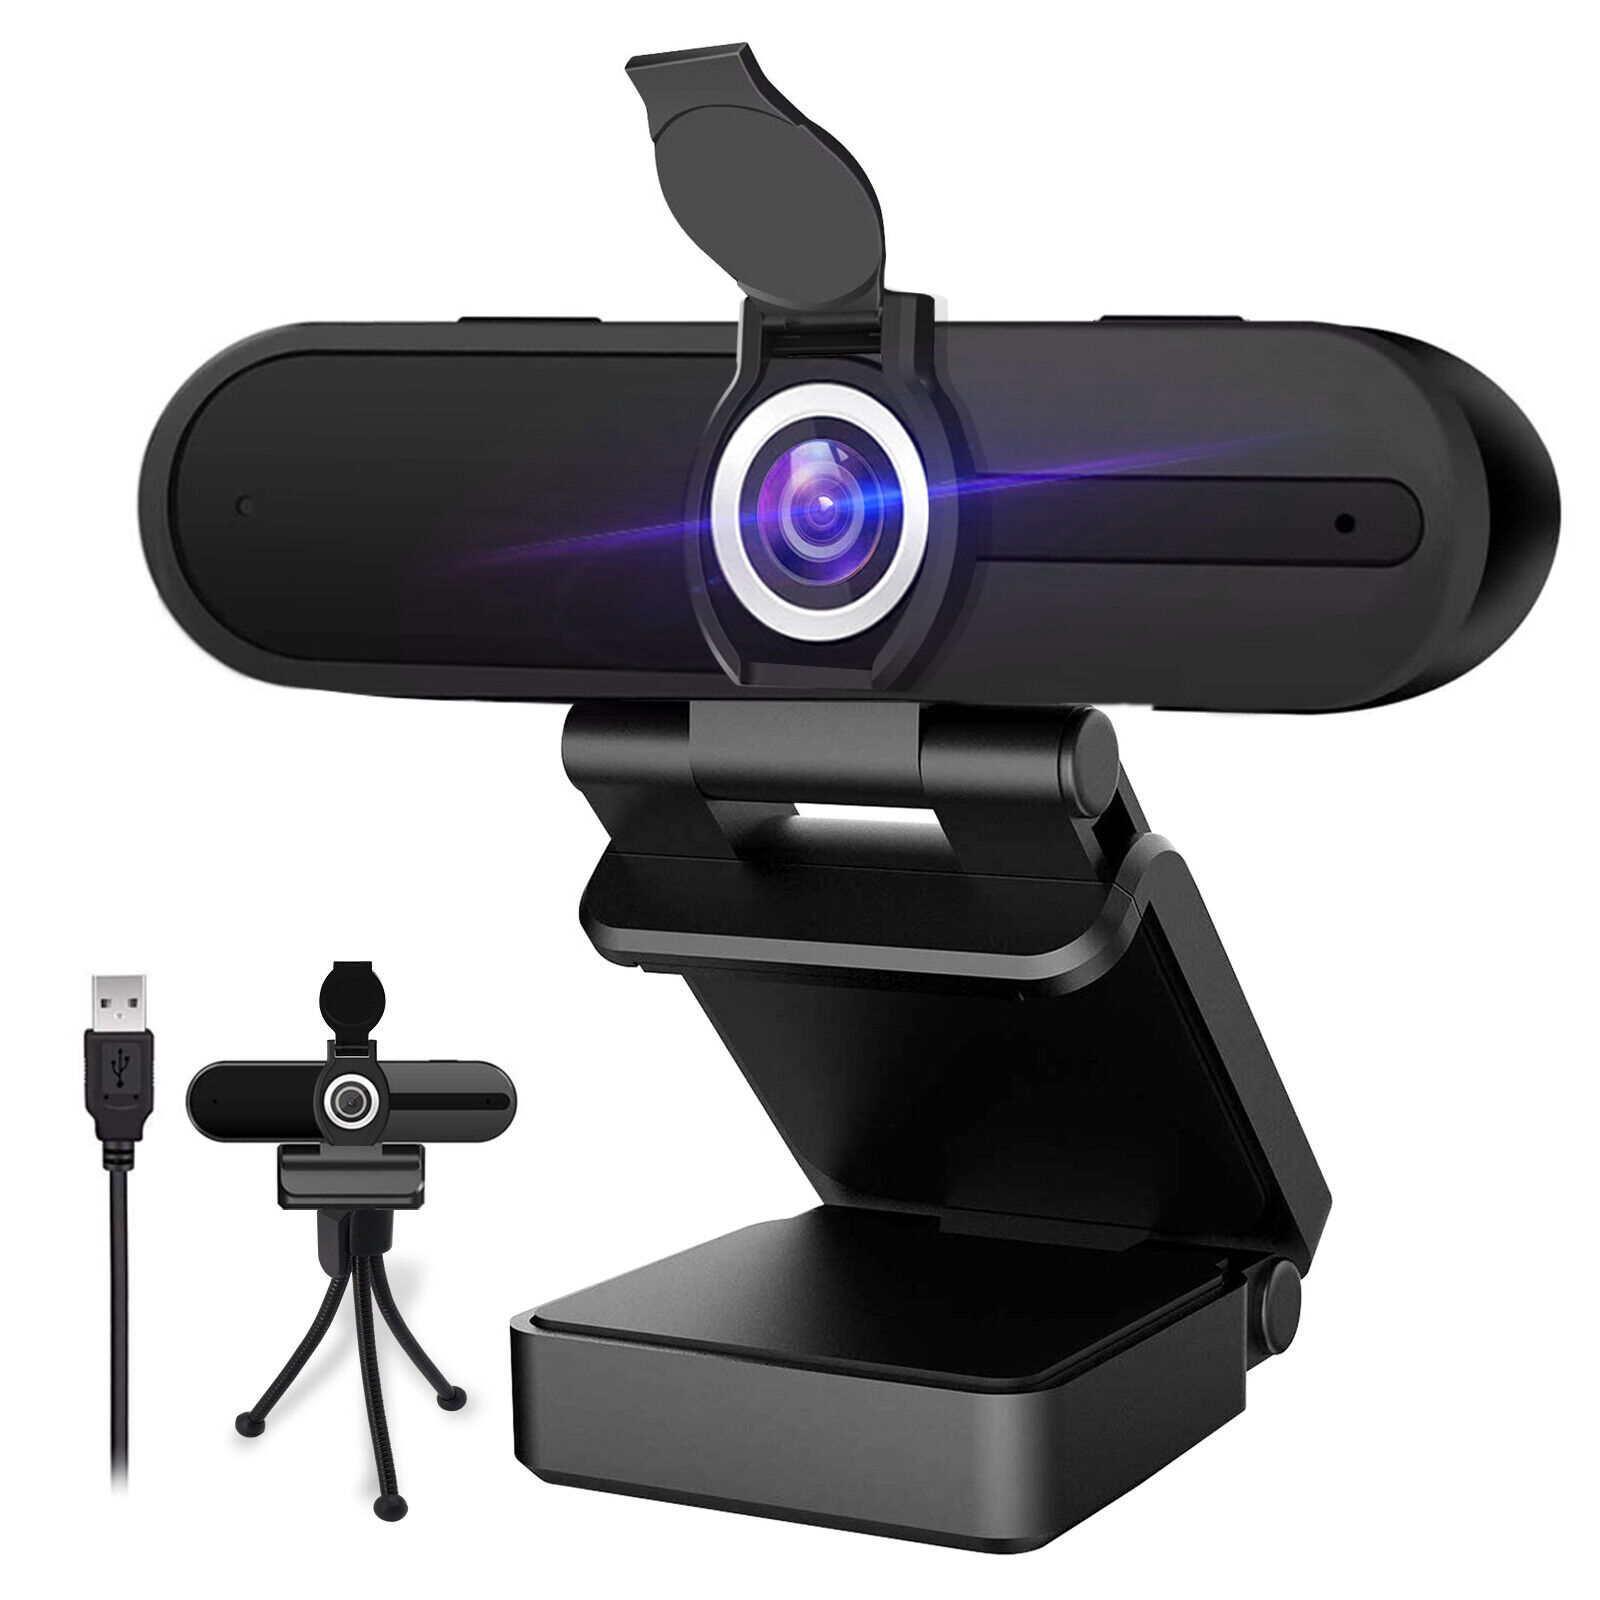 4K Webcam Ultra HD/8MP/Stream/Wide Angle with Microphone, Tripod, Privacy Cover